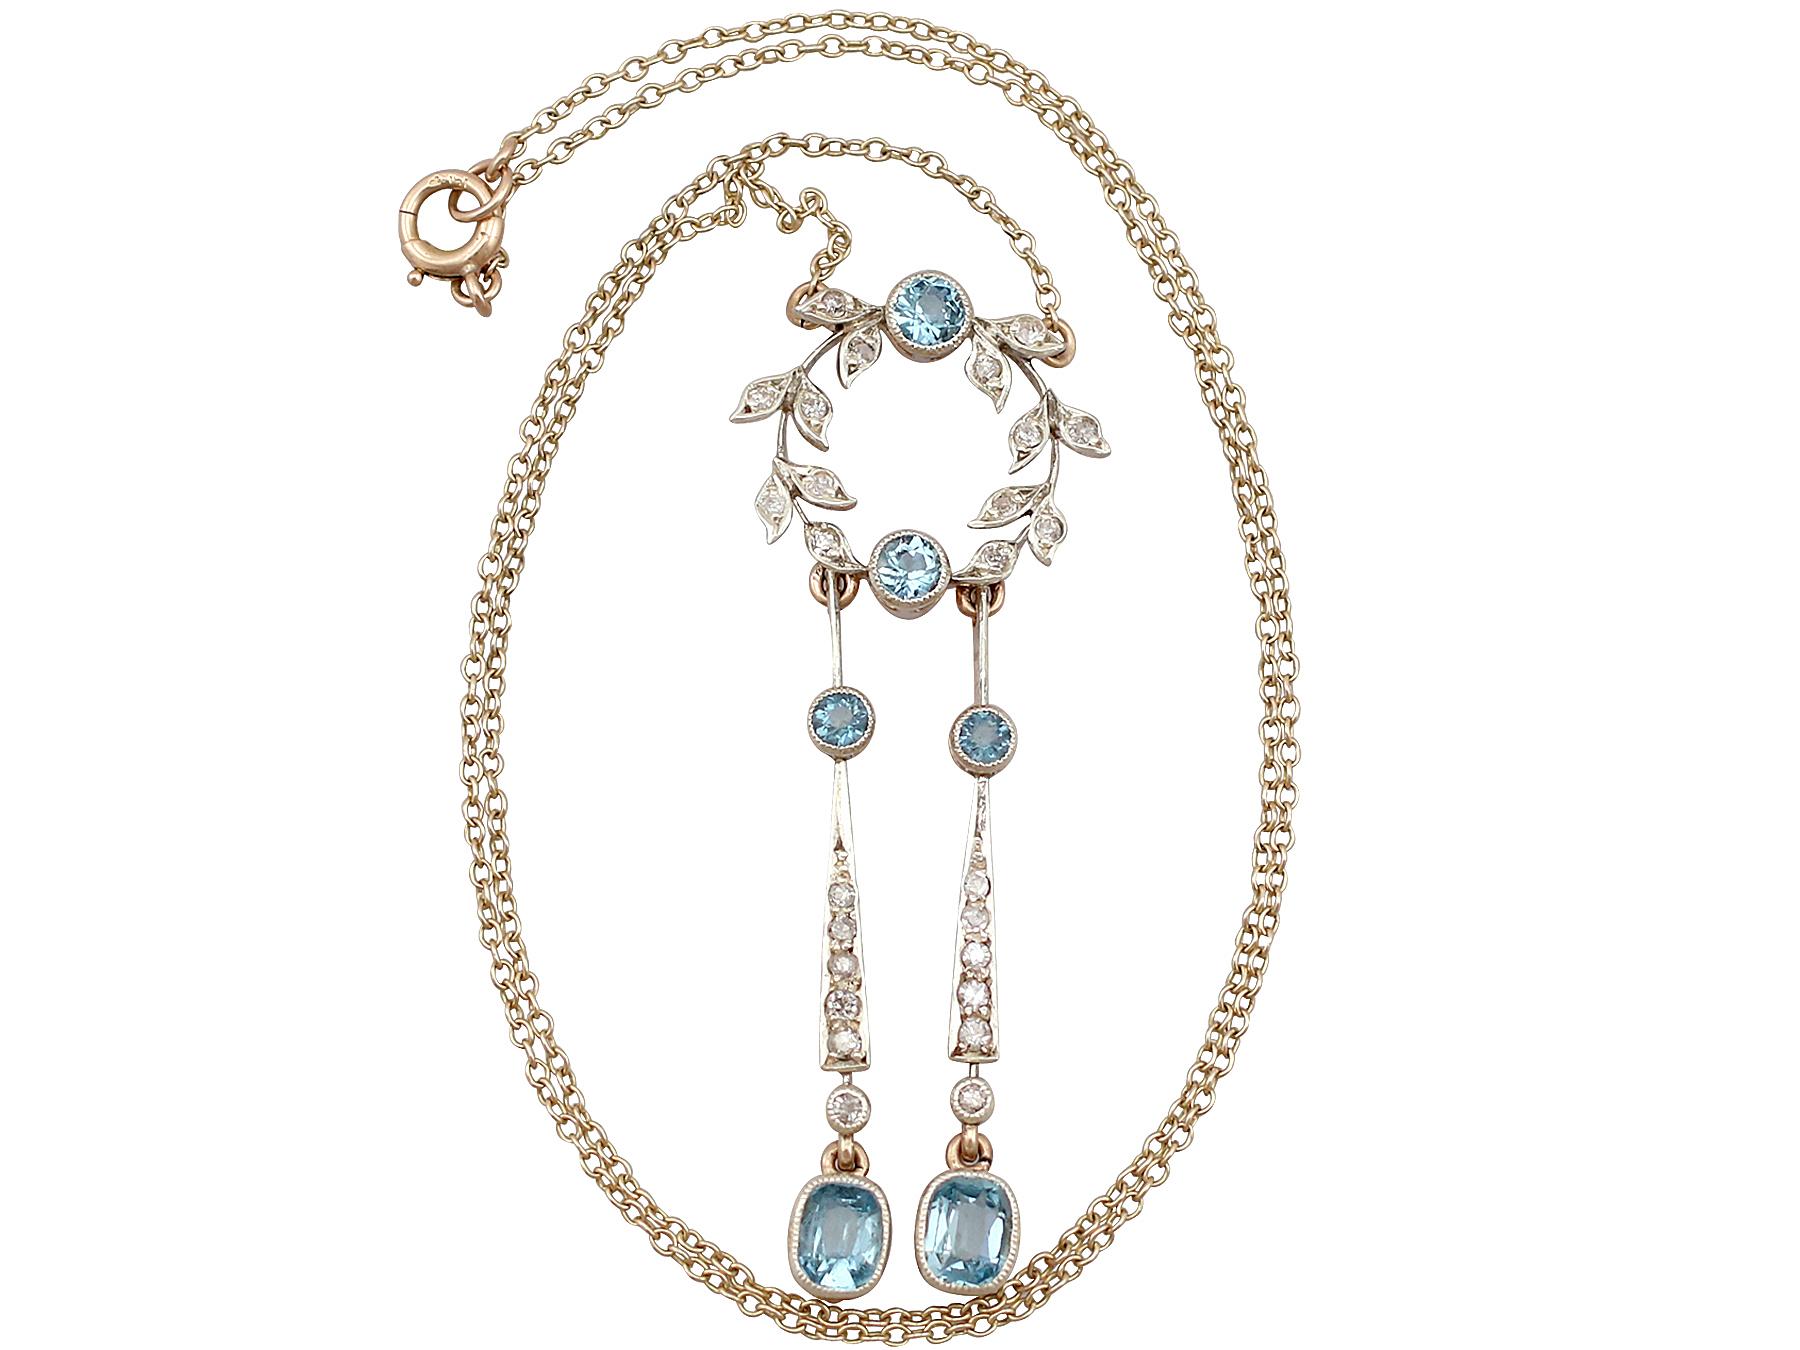 An exceptional, fine and impressive 1.32 carat aquamarine and 0.30 carat diamond, 9k yellow gold and silver set pendant; part of our antique jewellery and estate jewelry collections

This exceptional, fine and impressive diamond and aquamarine